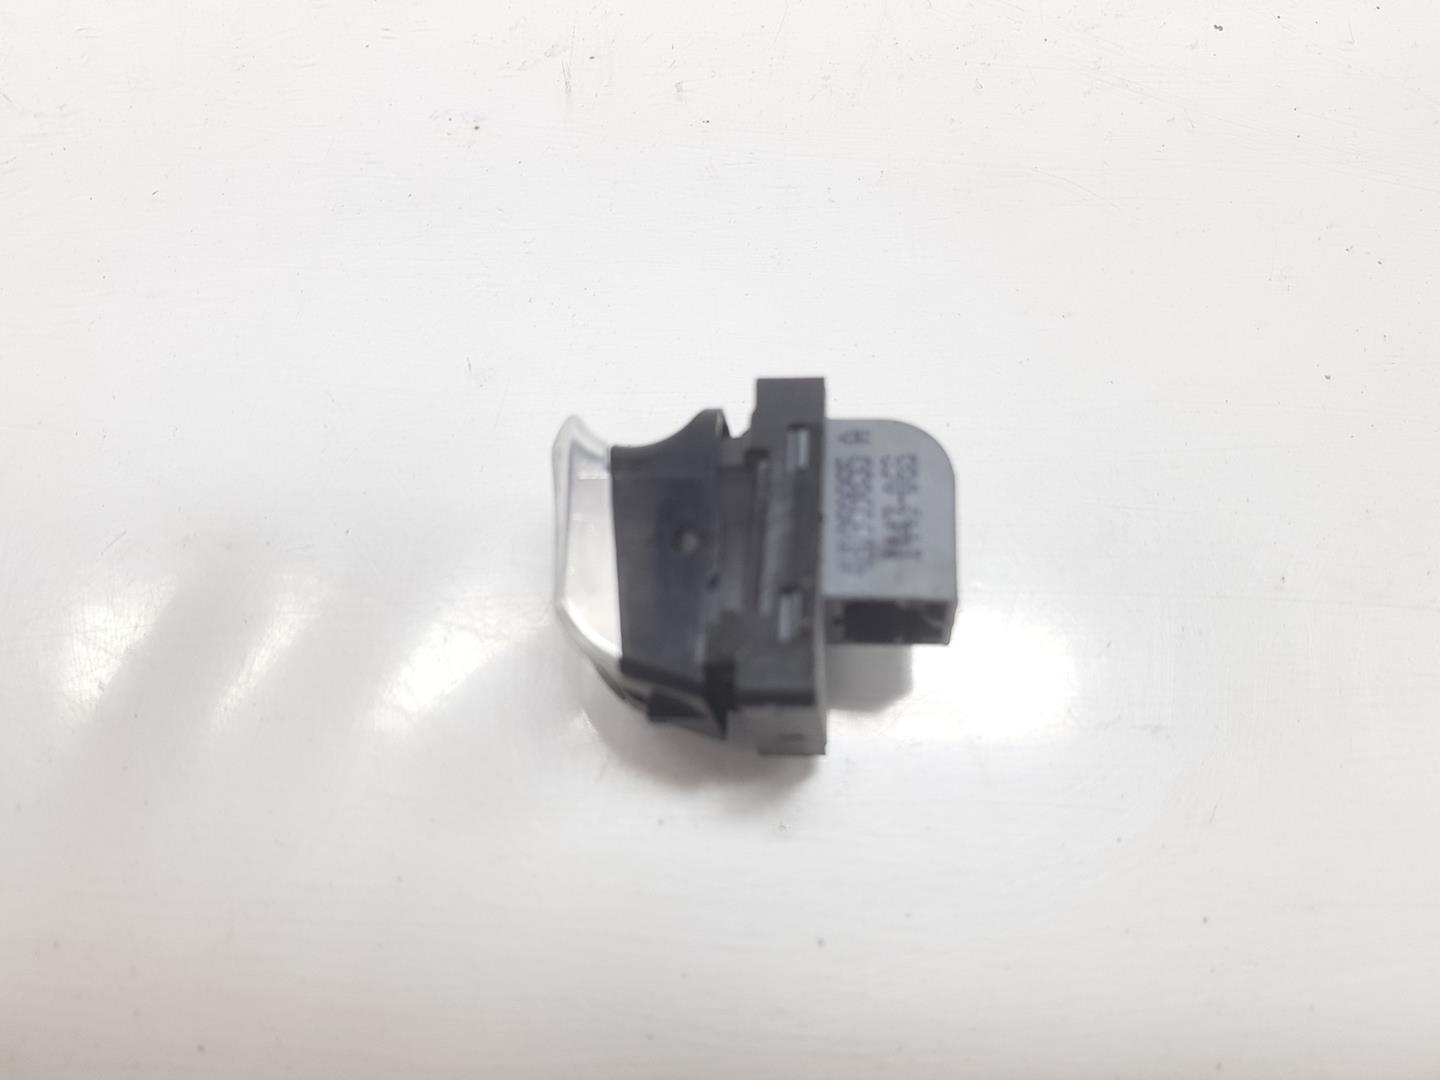 AUDI A7 C7/4G (2010-2020) Rear Right Door Window Control Switch 4H0959855A, 4H0959855A 19716998